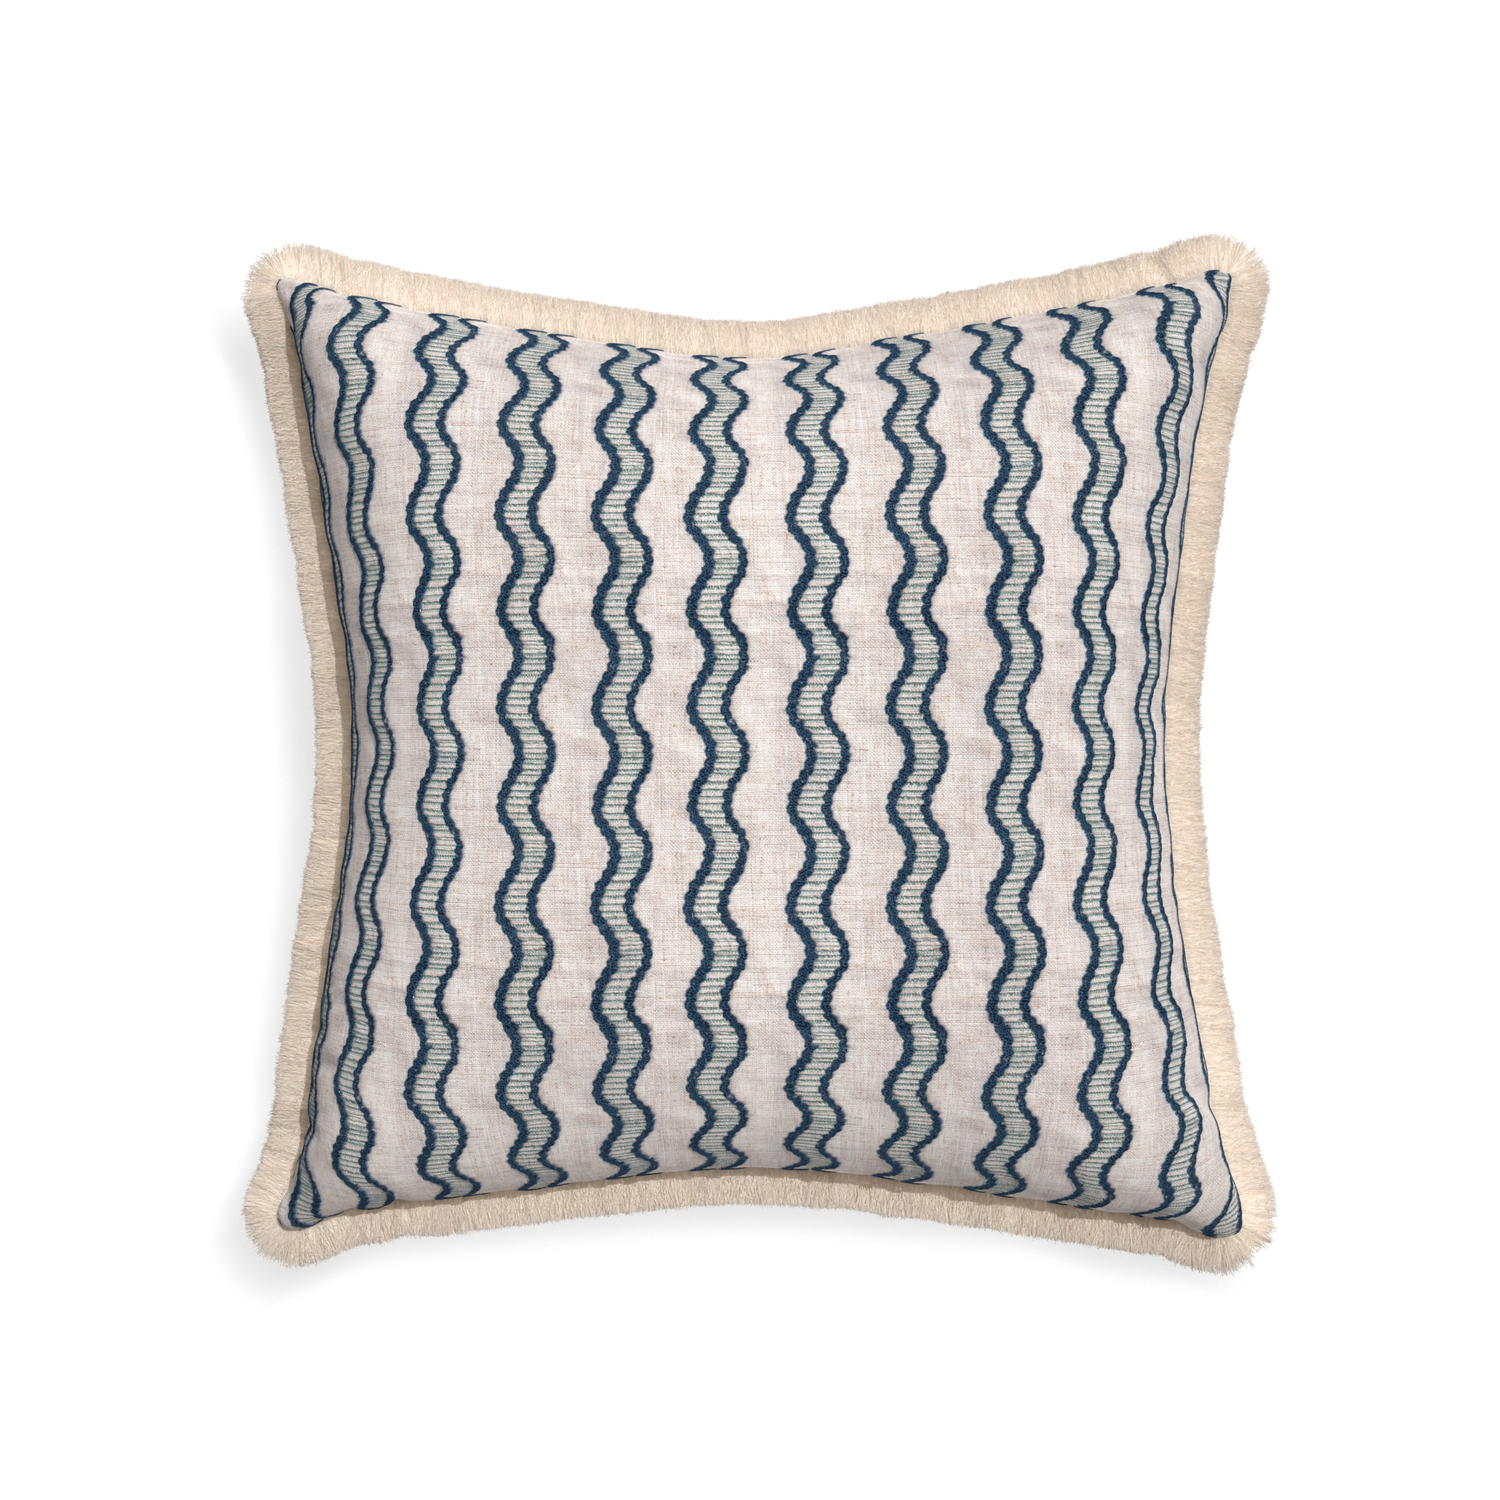 22-square beatrice custom embroidered wavepillow with cream fringe on white background